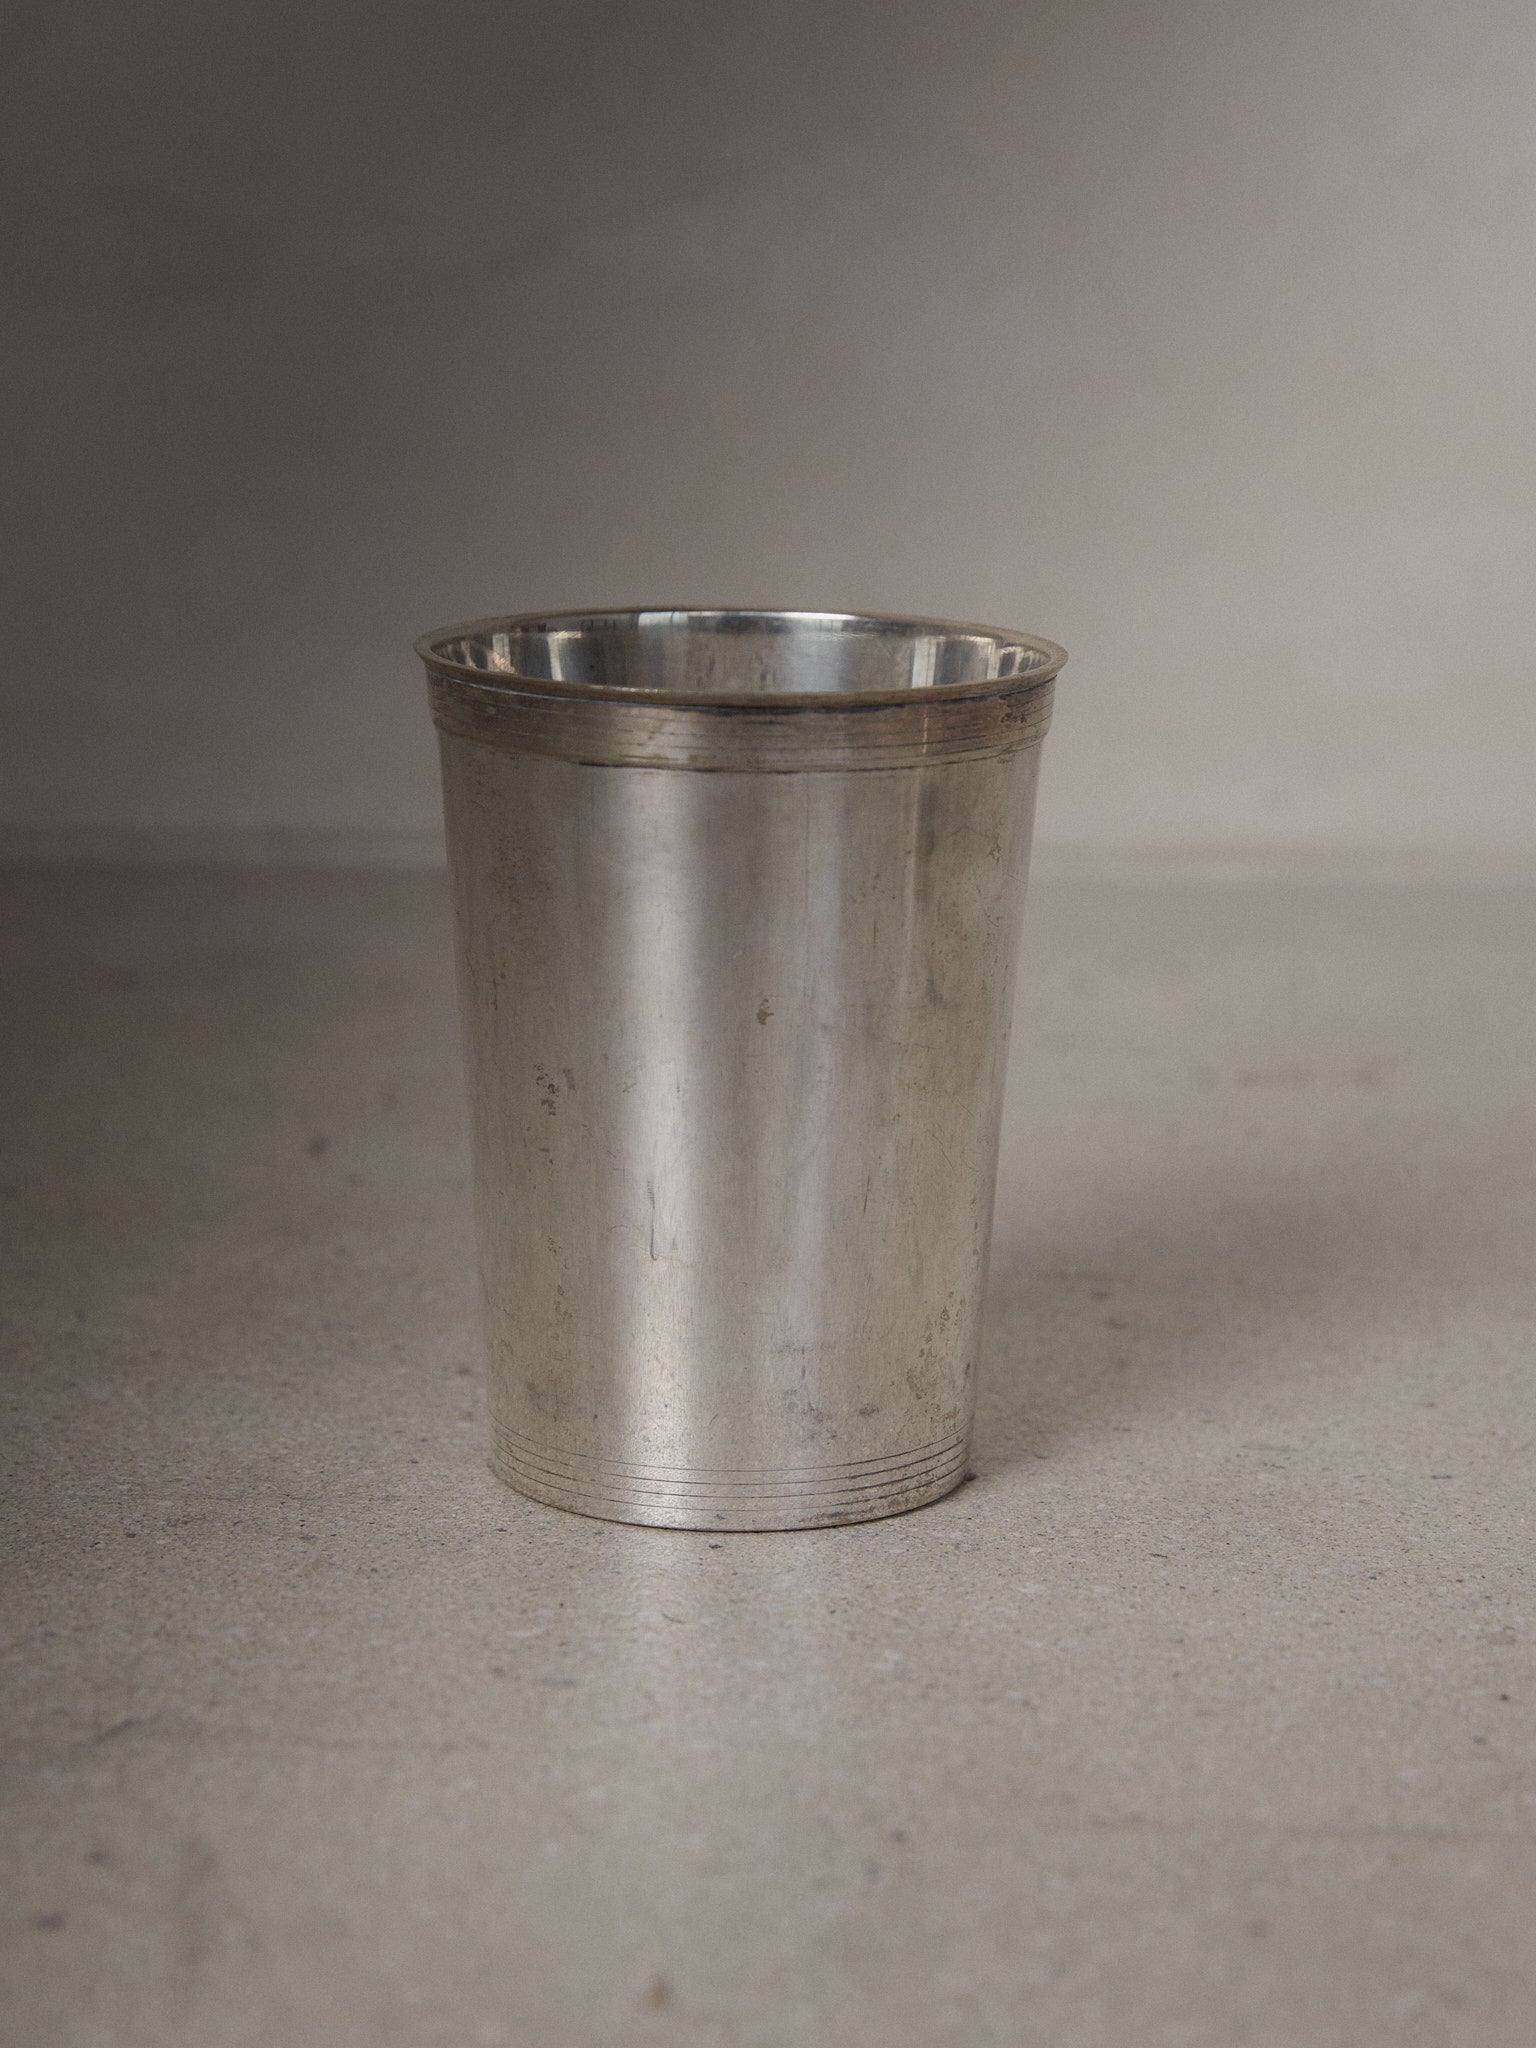 Squier. Rare vintage find. Vintage silver plated cup with tapered bodice and hand engraved, etched banding details at rim. 